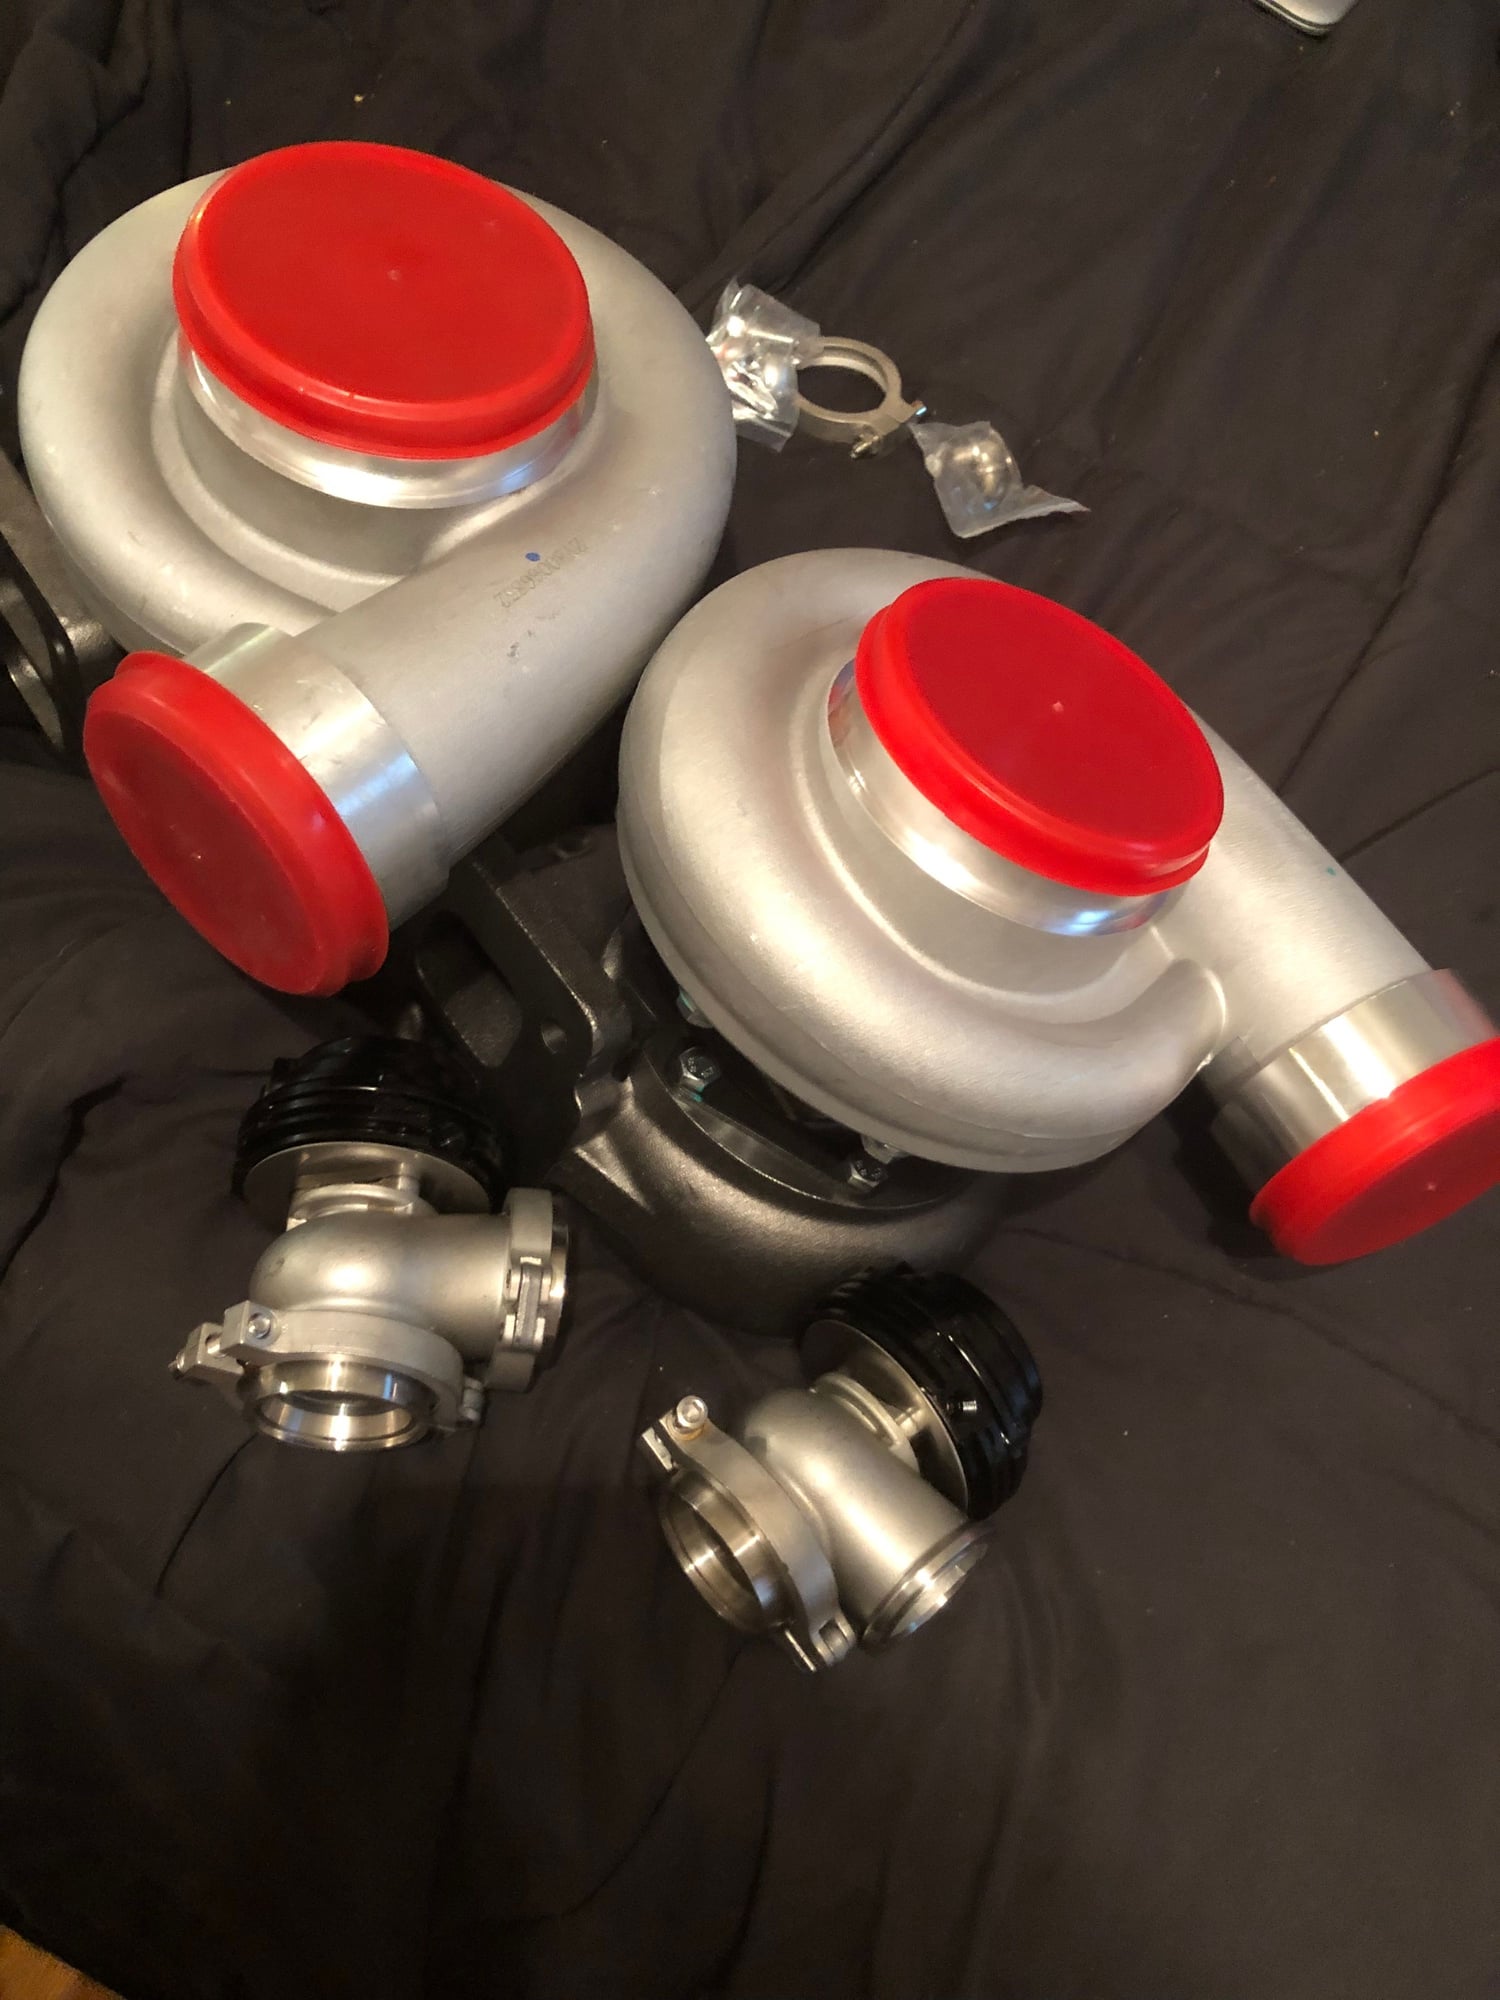  - Twin GT45s with 38mm wastegates - Hagerstown, MD 21742, United States